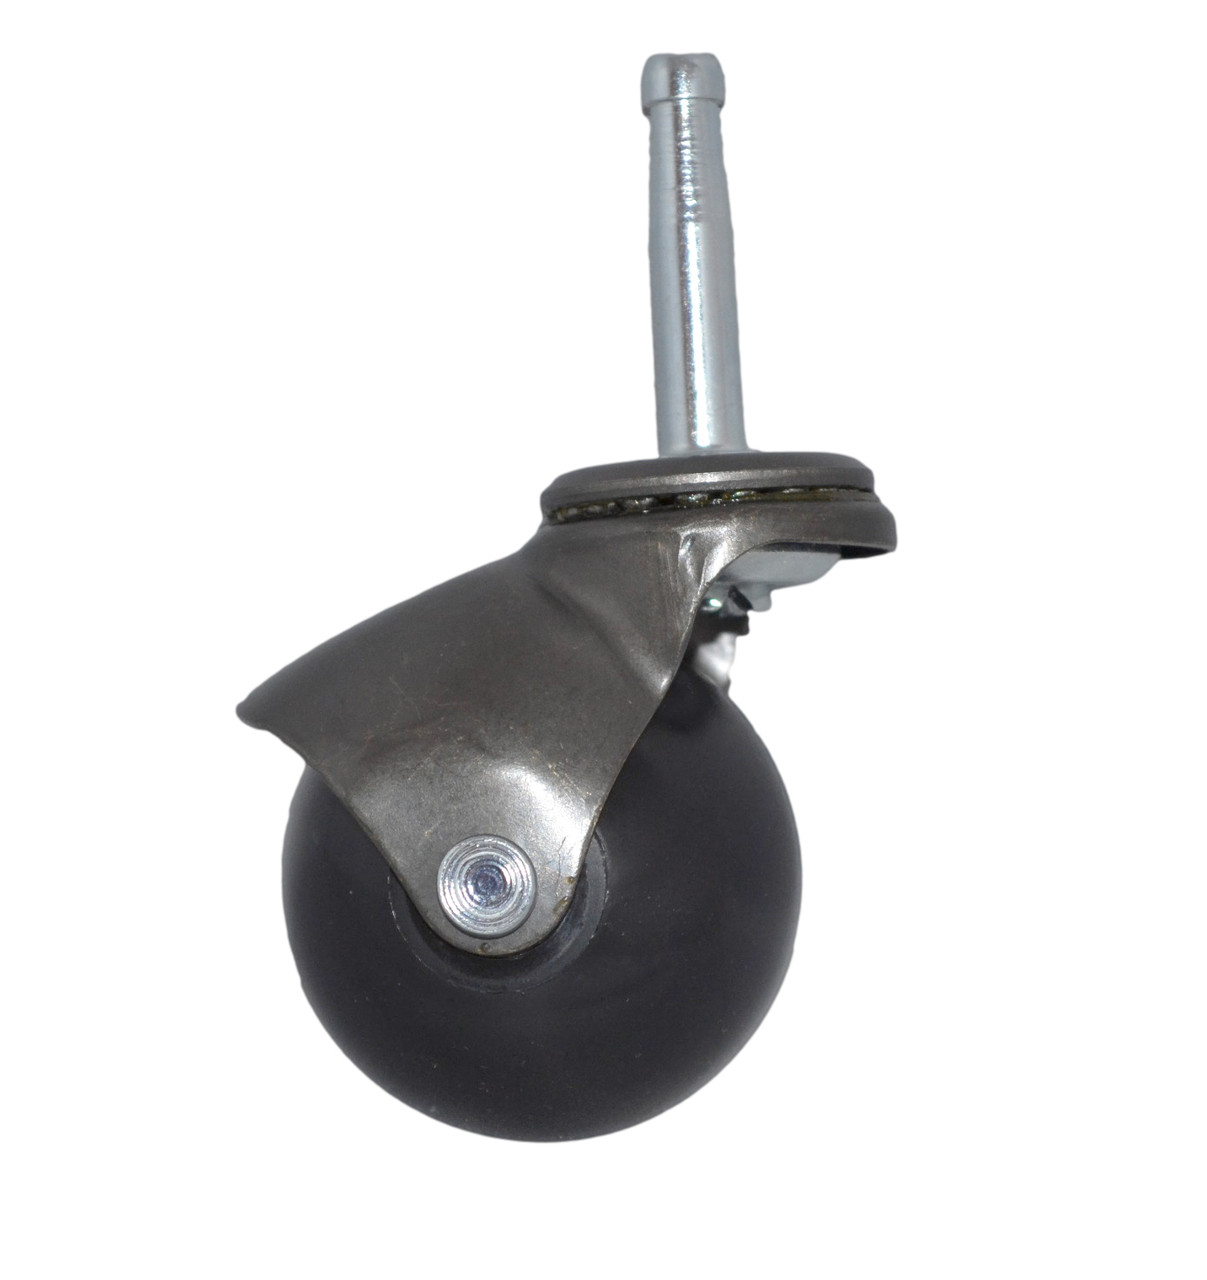 2 5 Inch Metal Ball Caster For Office Chair And Office Furniture